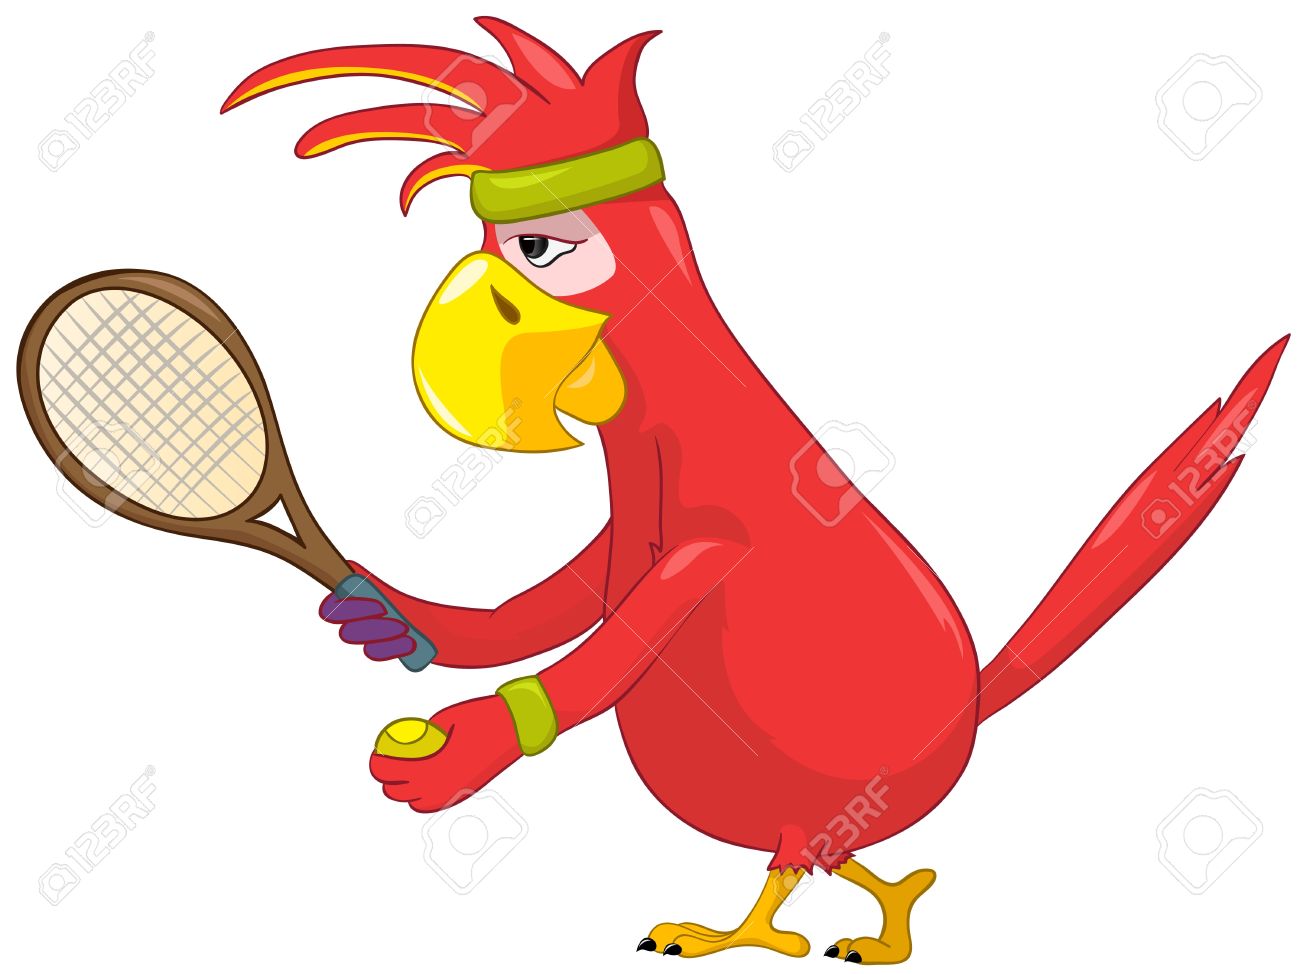 funny tennis clipart - photo #16